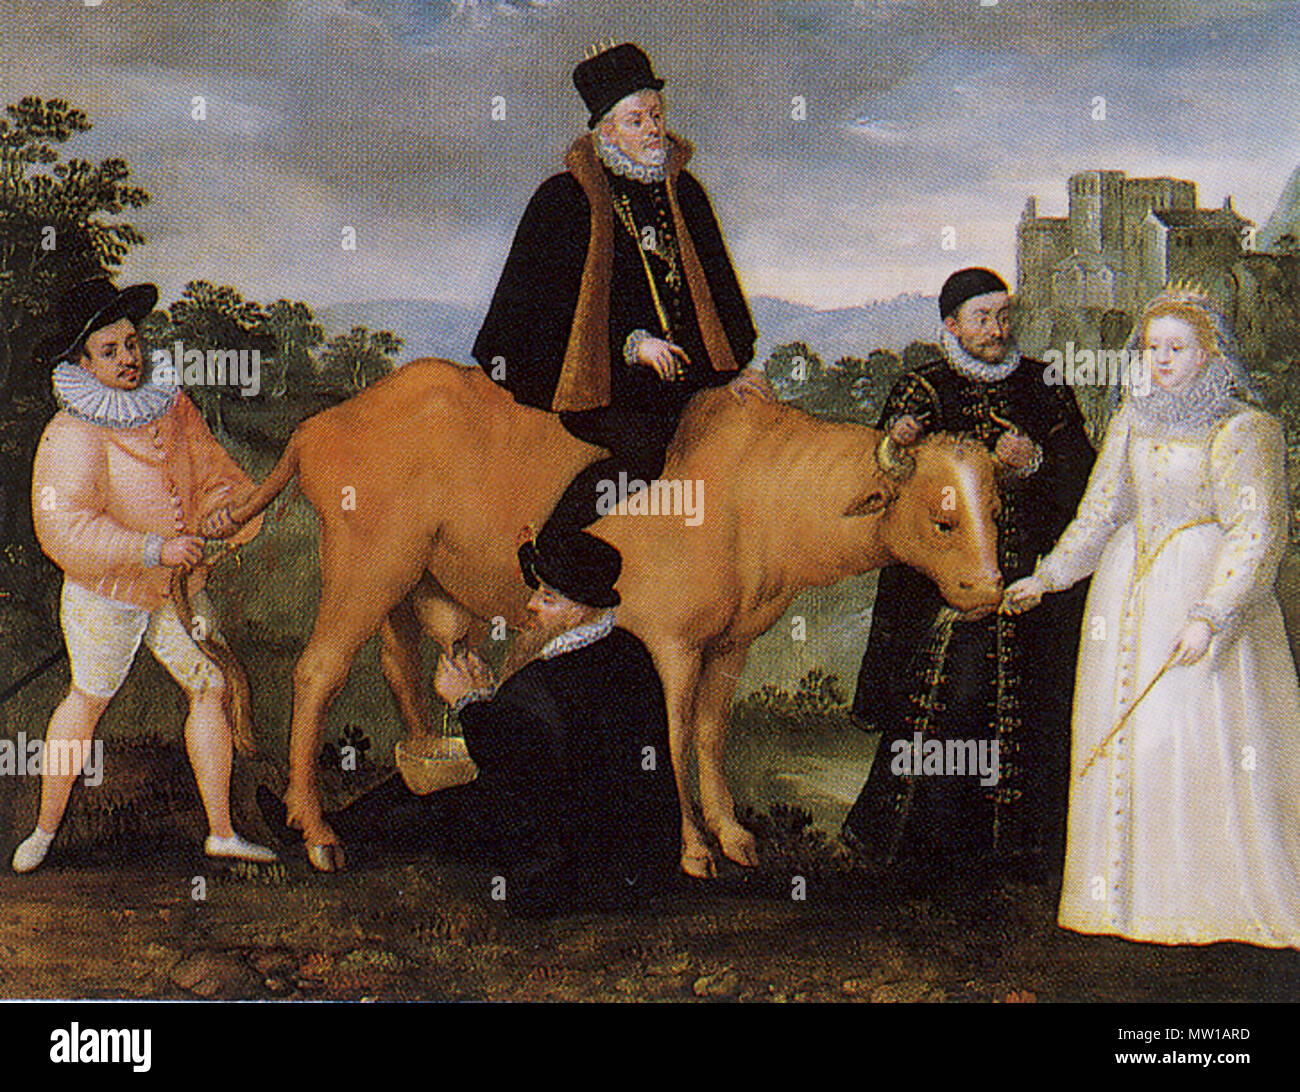 . English: Queen Elizabeth I Feeds the Dutch Cow. Oil on panel, 39.4 × 49.5, artist unknown. This satirical painting depicts a cow which represents the Dutch provinces. King Philip II of Spain is vainly trying to ride the cow, drawing blood with his spurs. Queen Elizabeth is feeding it while William of Orange holds it steady by the horns. The cow is defecating on the Duke of Anjou, who is holding its tail. The picture was painted in the period following the visit of François, Duke of Anjou (brother of King Henry III of France) to Queen Elizabeth's court in 1581–82 to discuss his marriage propo Stock Photo